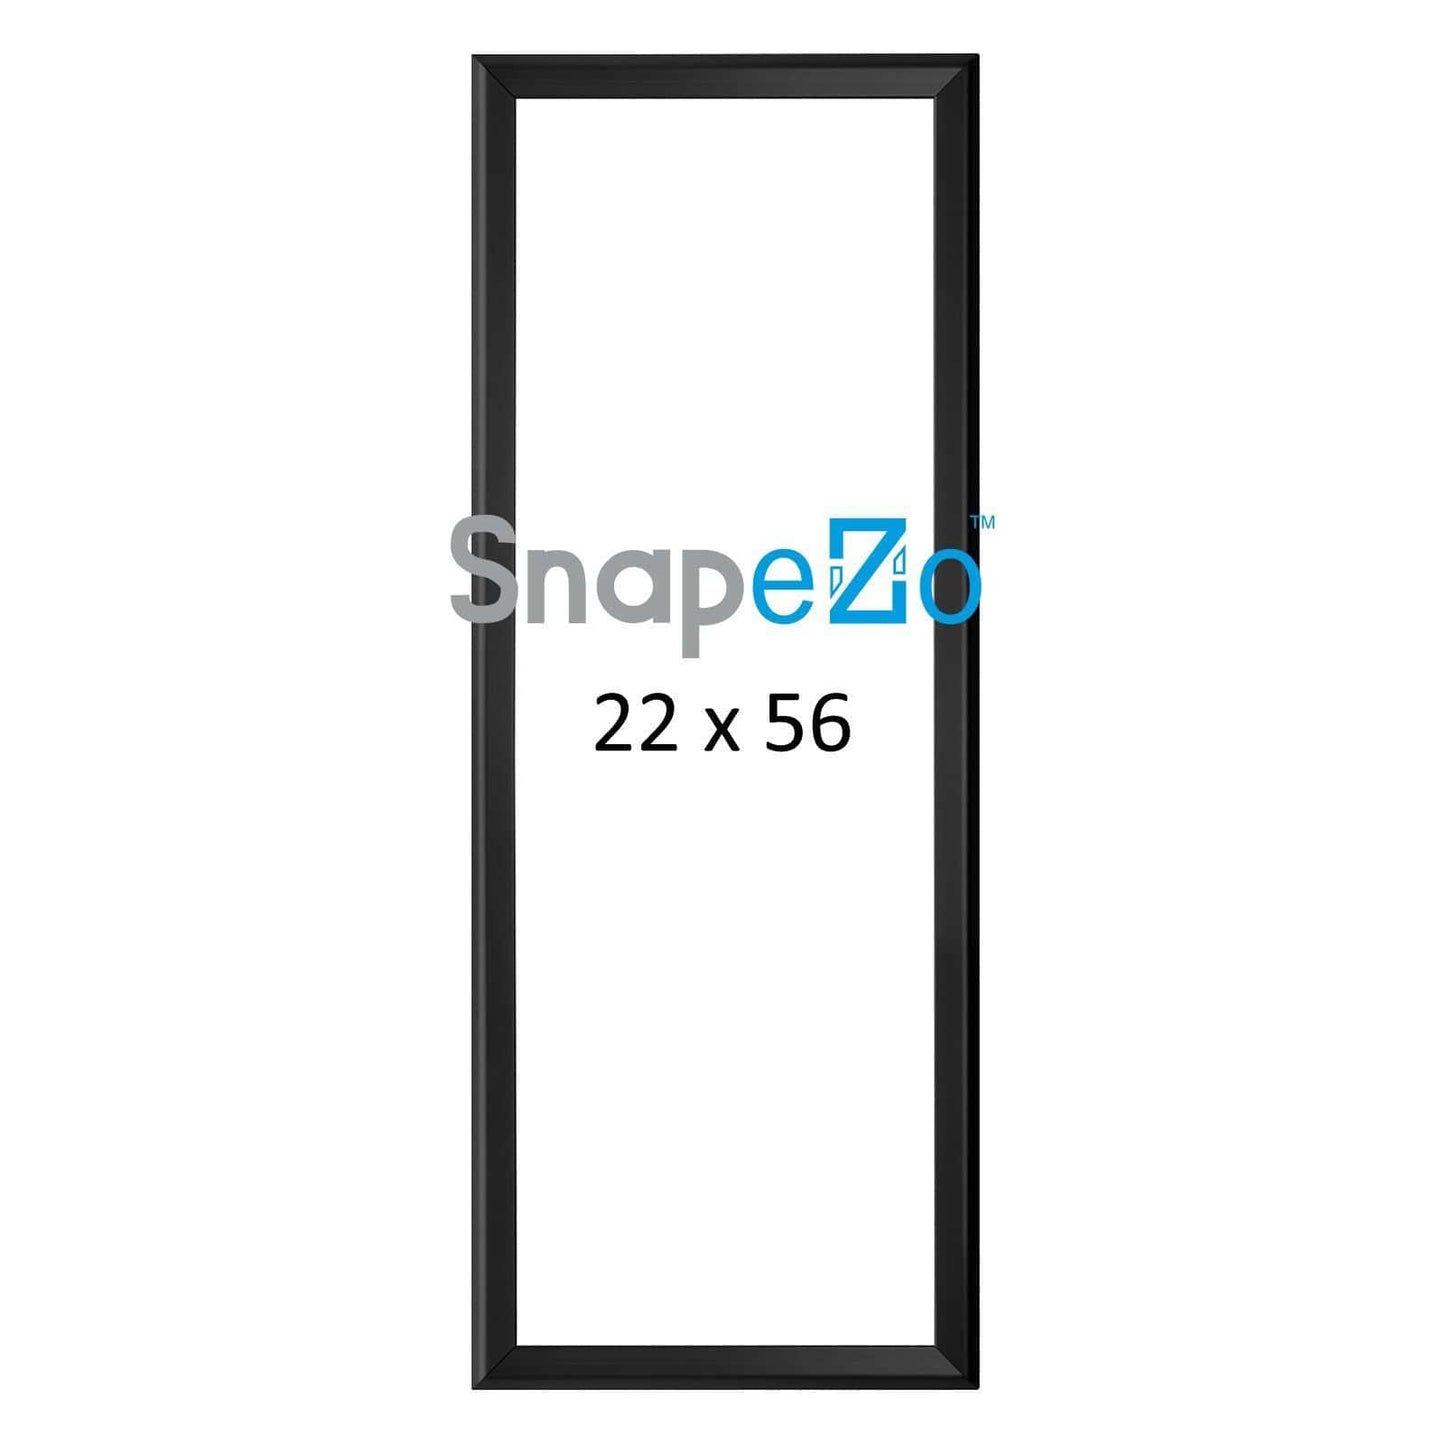 Black snap frame poster size 22X56 - 1.25 inch profile - Self-Assembly - Snap Frames Direct